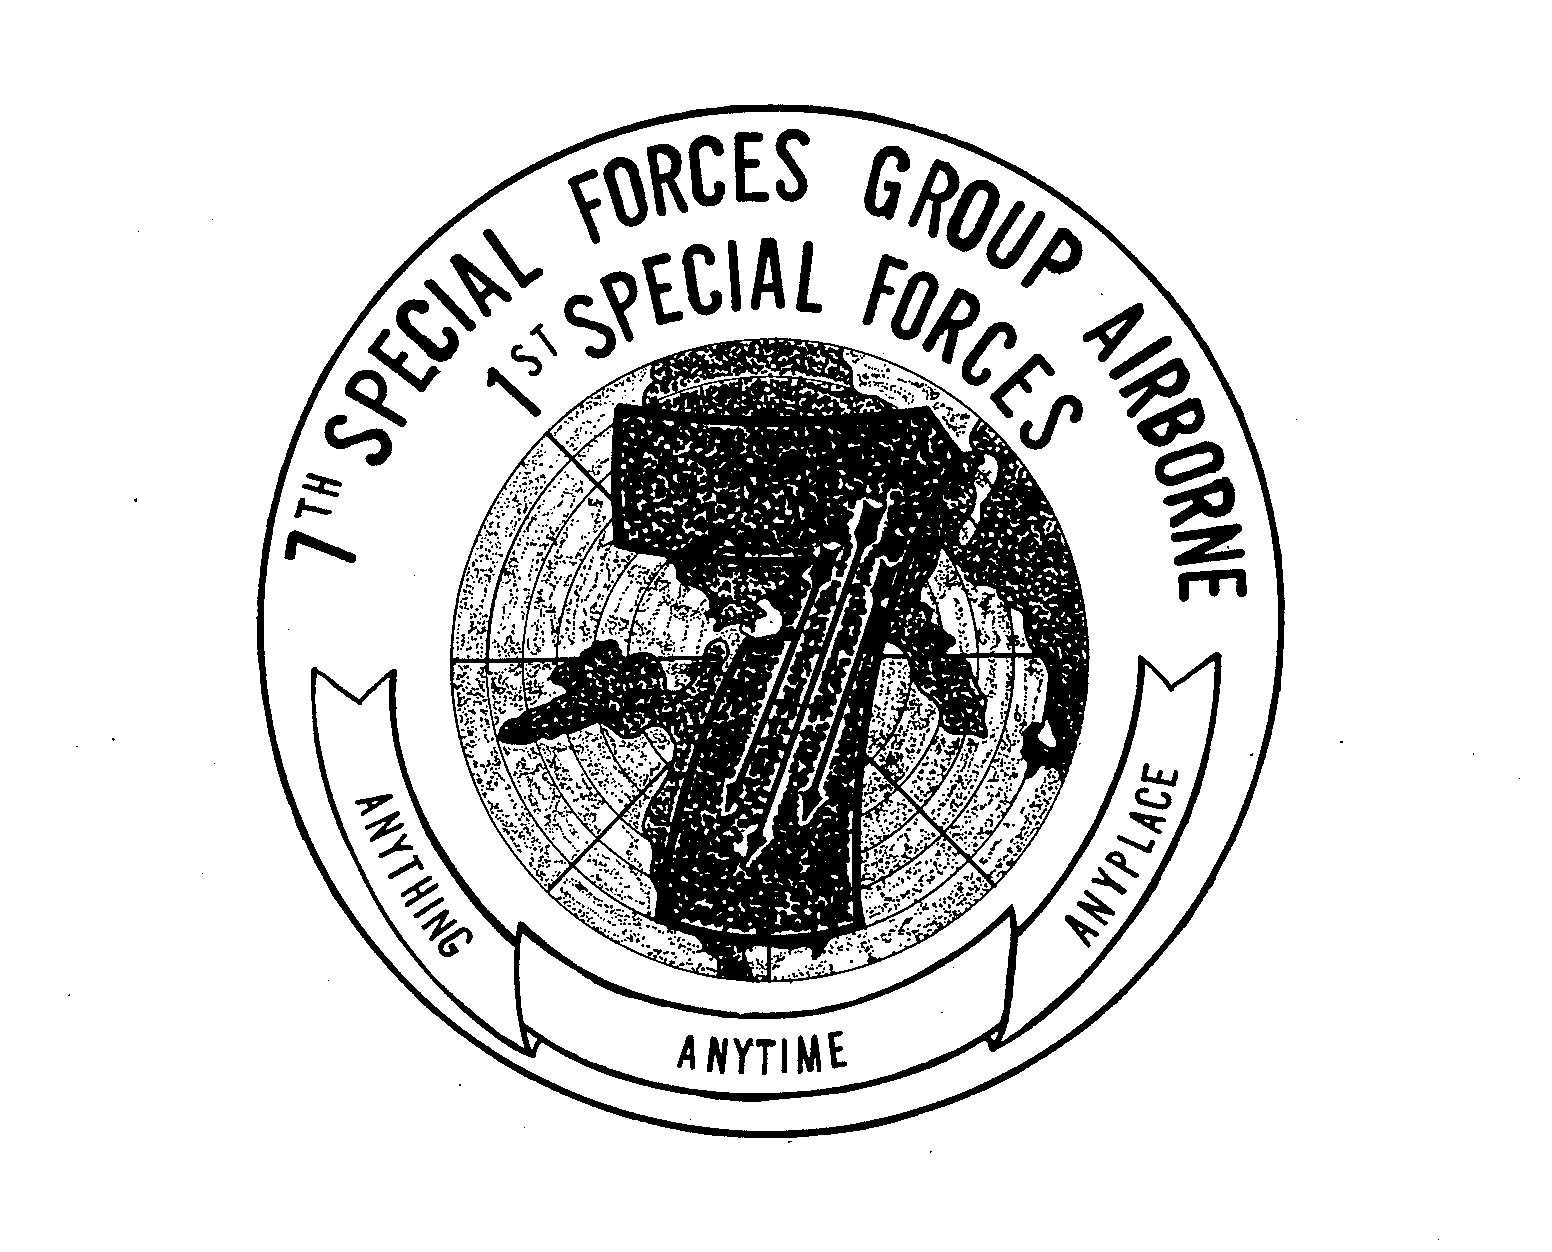  7TH SPECIAL FORCES GROUP AIRBORNE 1ST SPECIAL FORCES 7 ANYTHING ANYTIME ANYPLACE